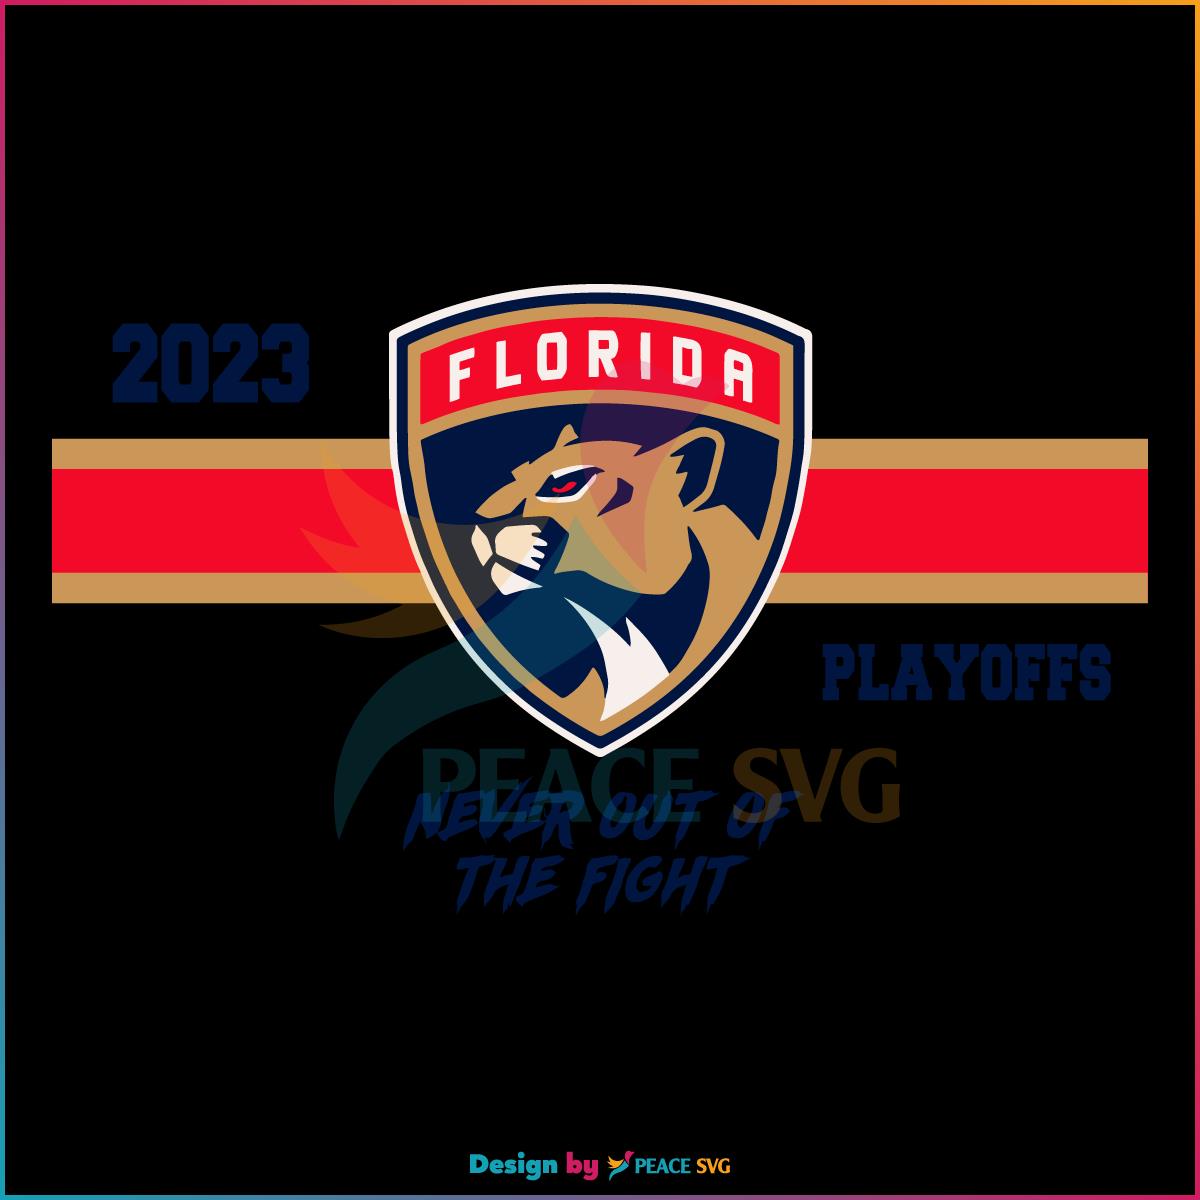 Florida Panthers 2023 Stanley Cup Playoff Svg